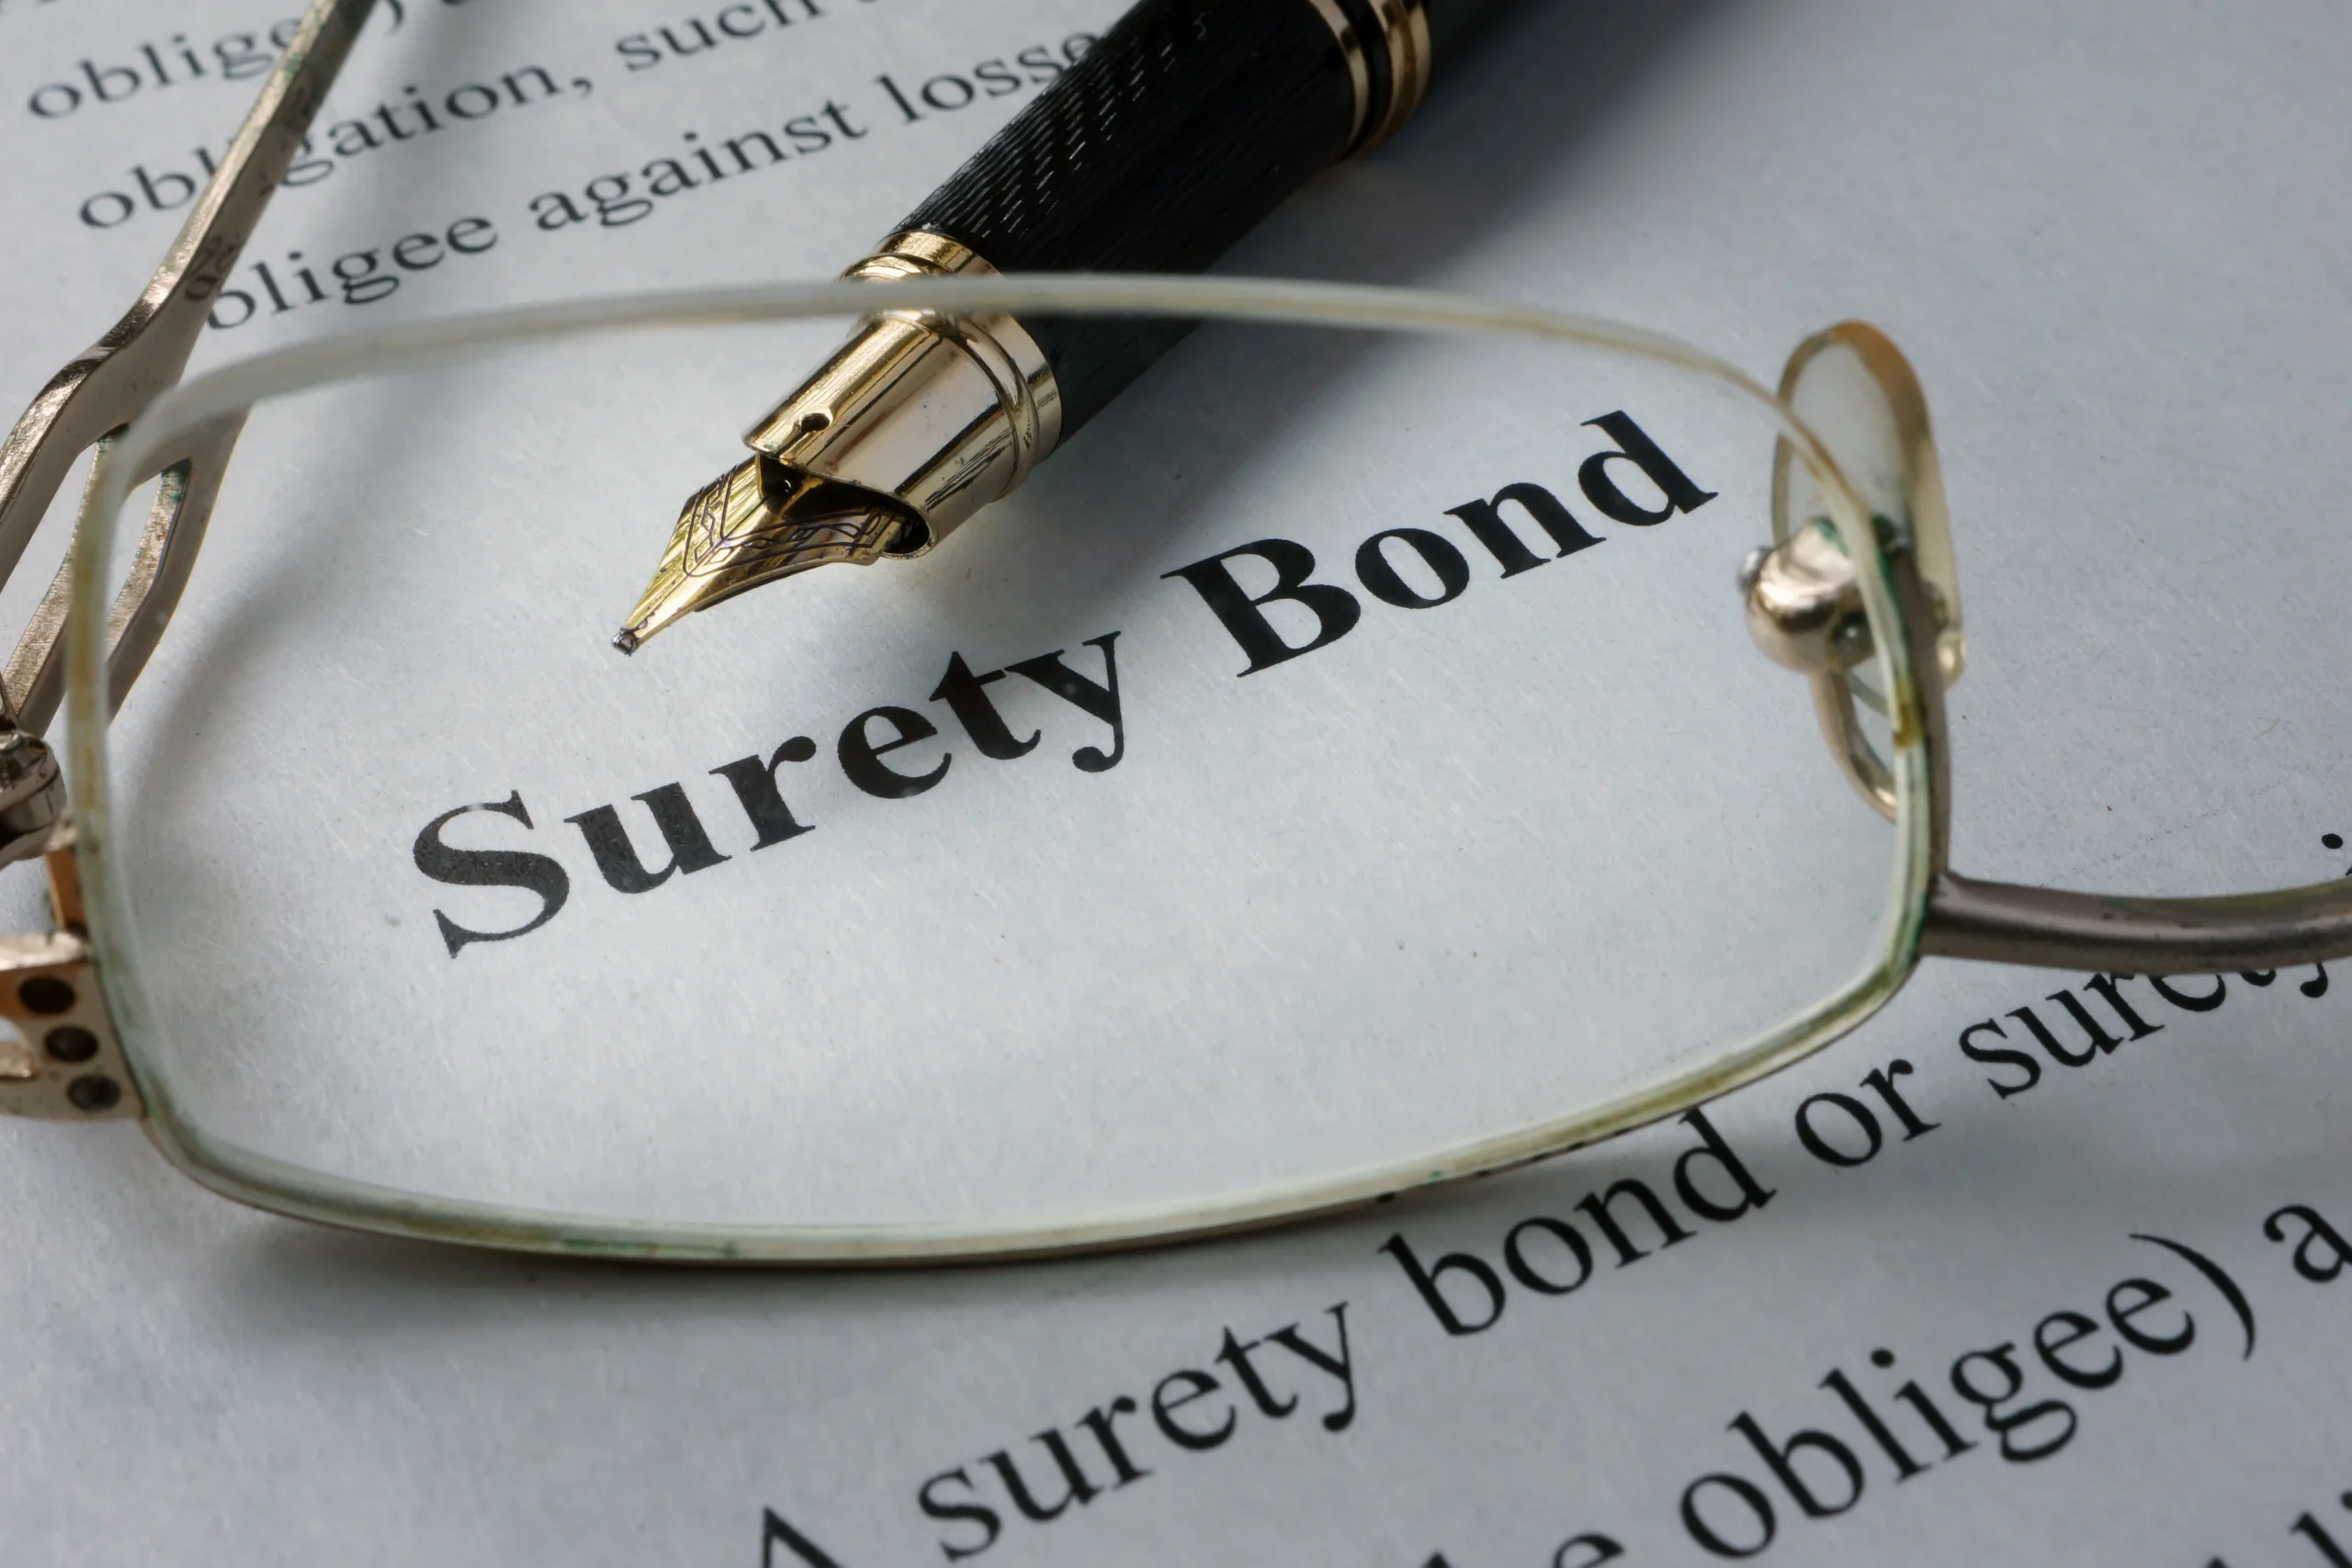 Provider of Surety Bonds For Small Independent Companies